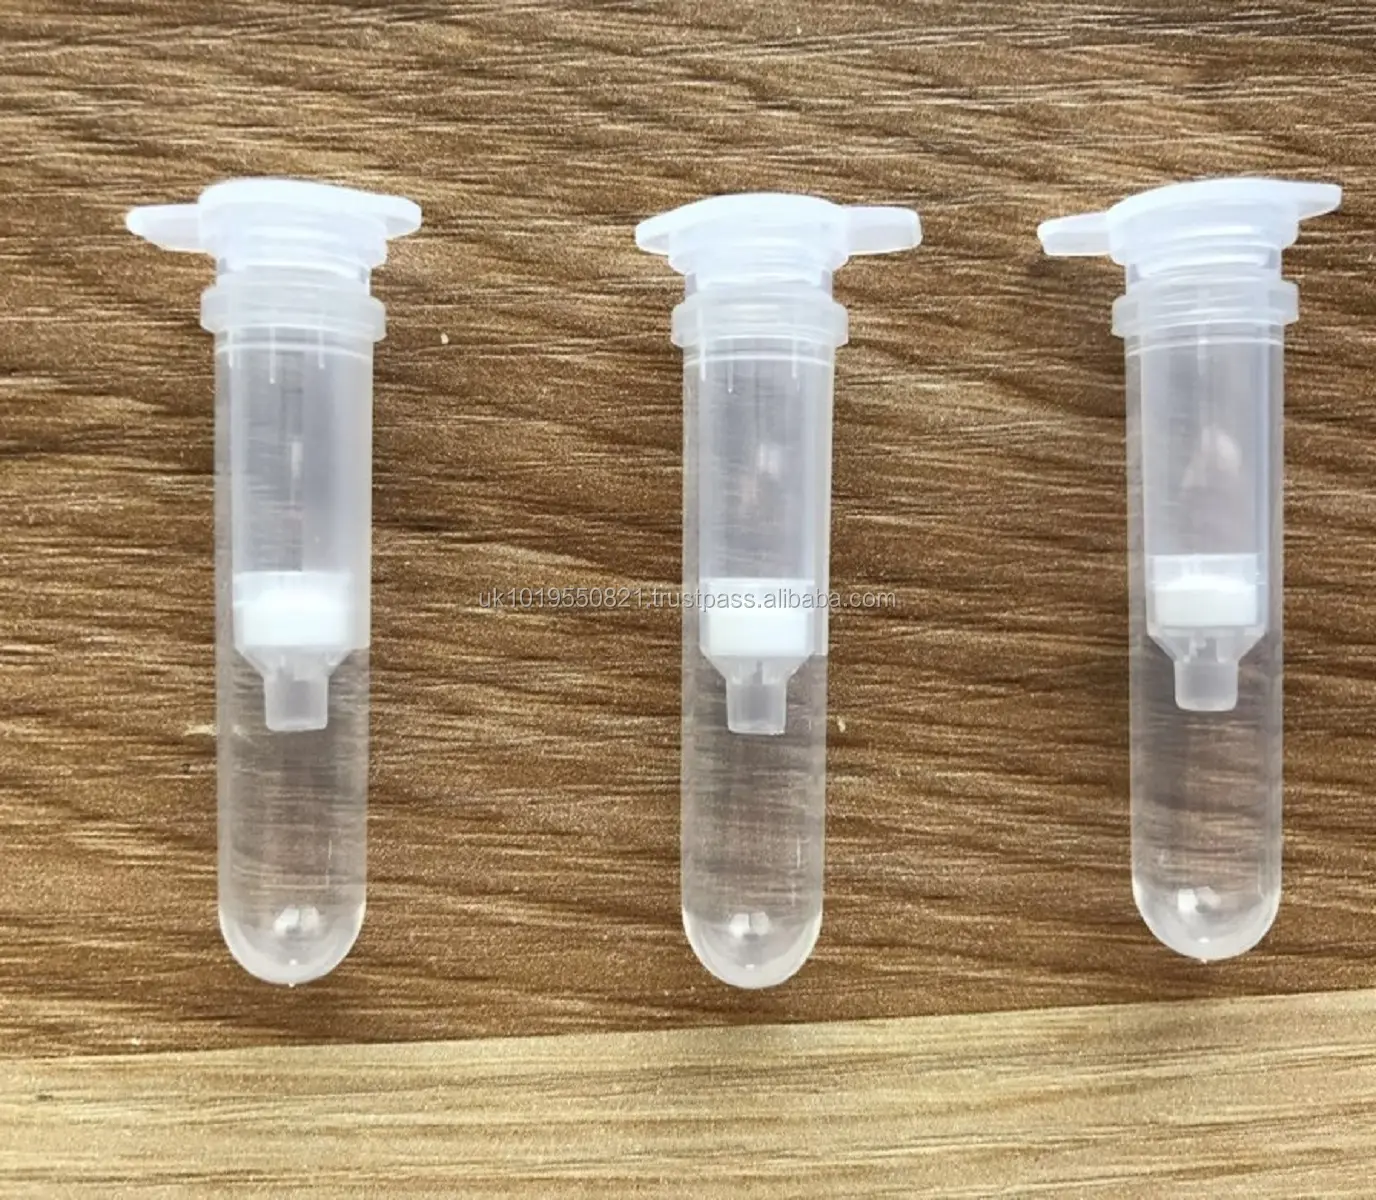 AISIMO DNA/RNA Purification spin column plastic transparent collection tube